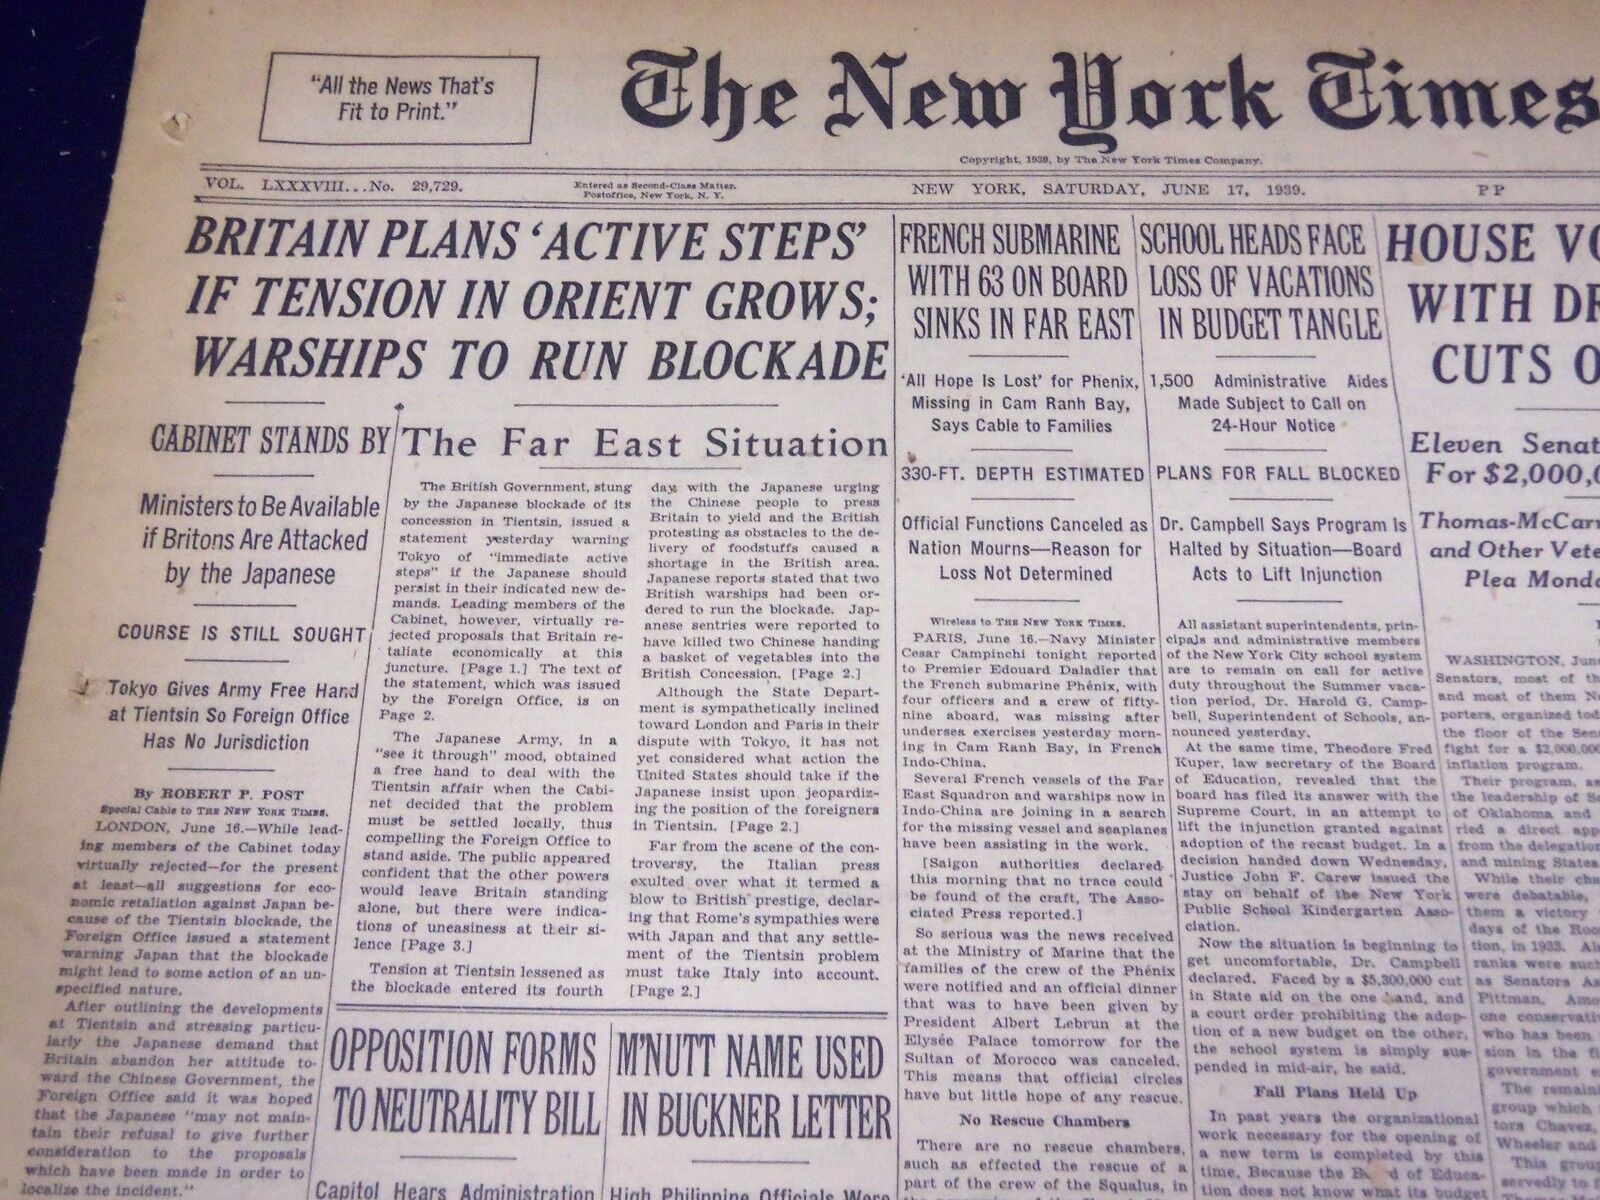 1939 JUNE 17 NEW YORK TIMES - BRITAIN PLANS ACTIVE STEPS IN TENSION - NT 594